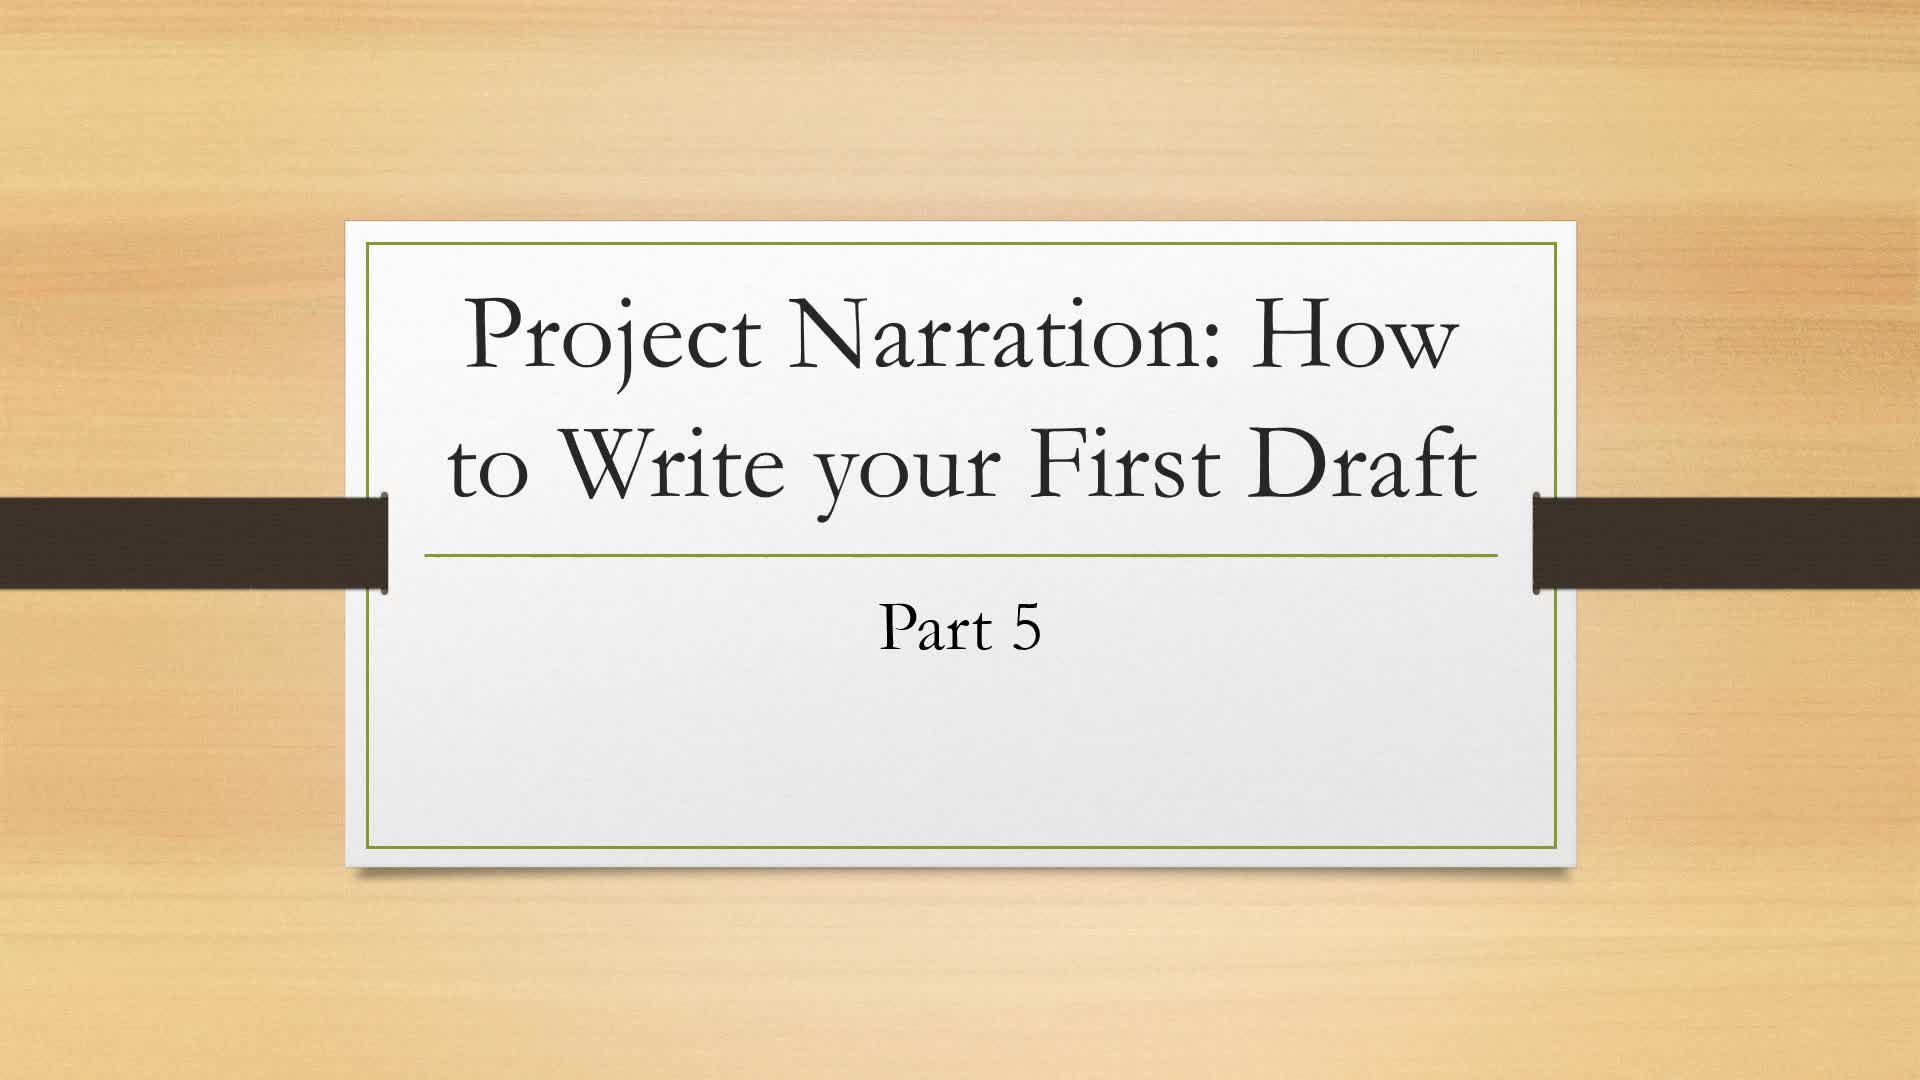 Project Narration: Writing Your First Draft Part 5